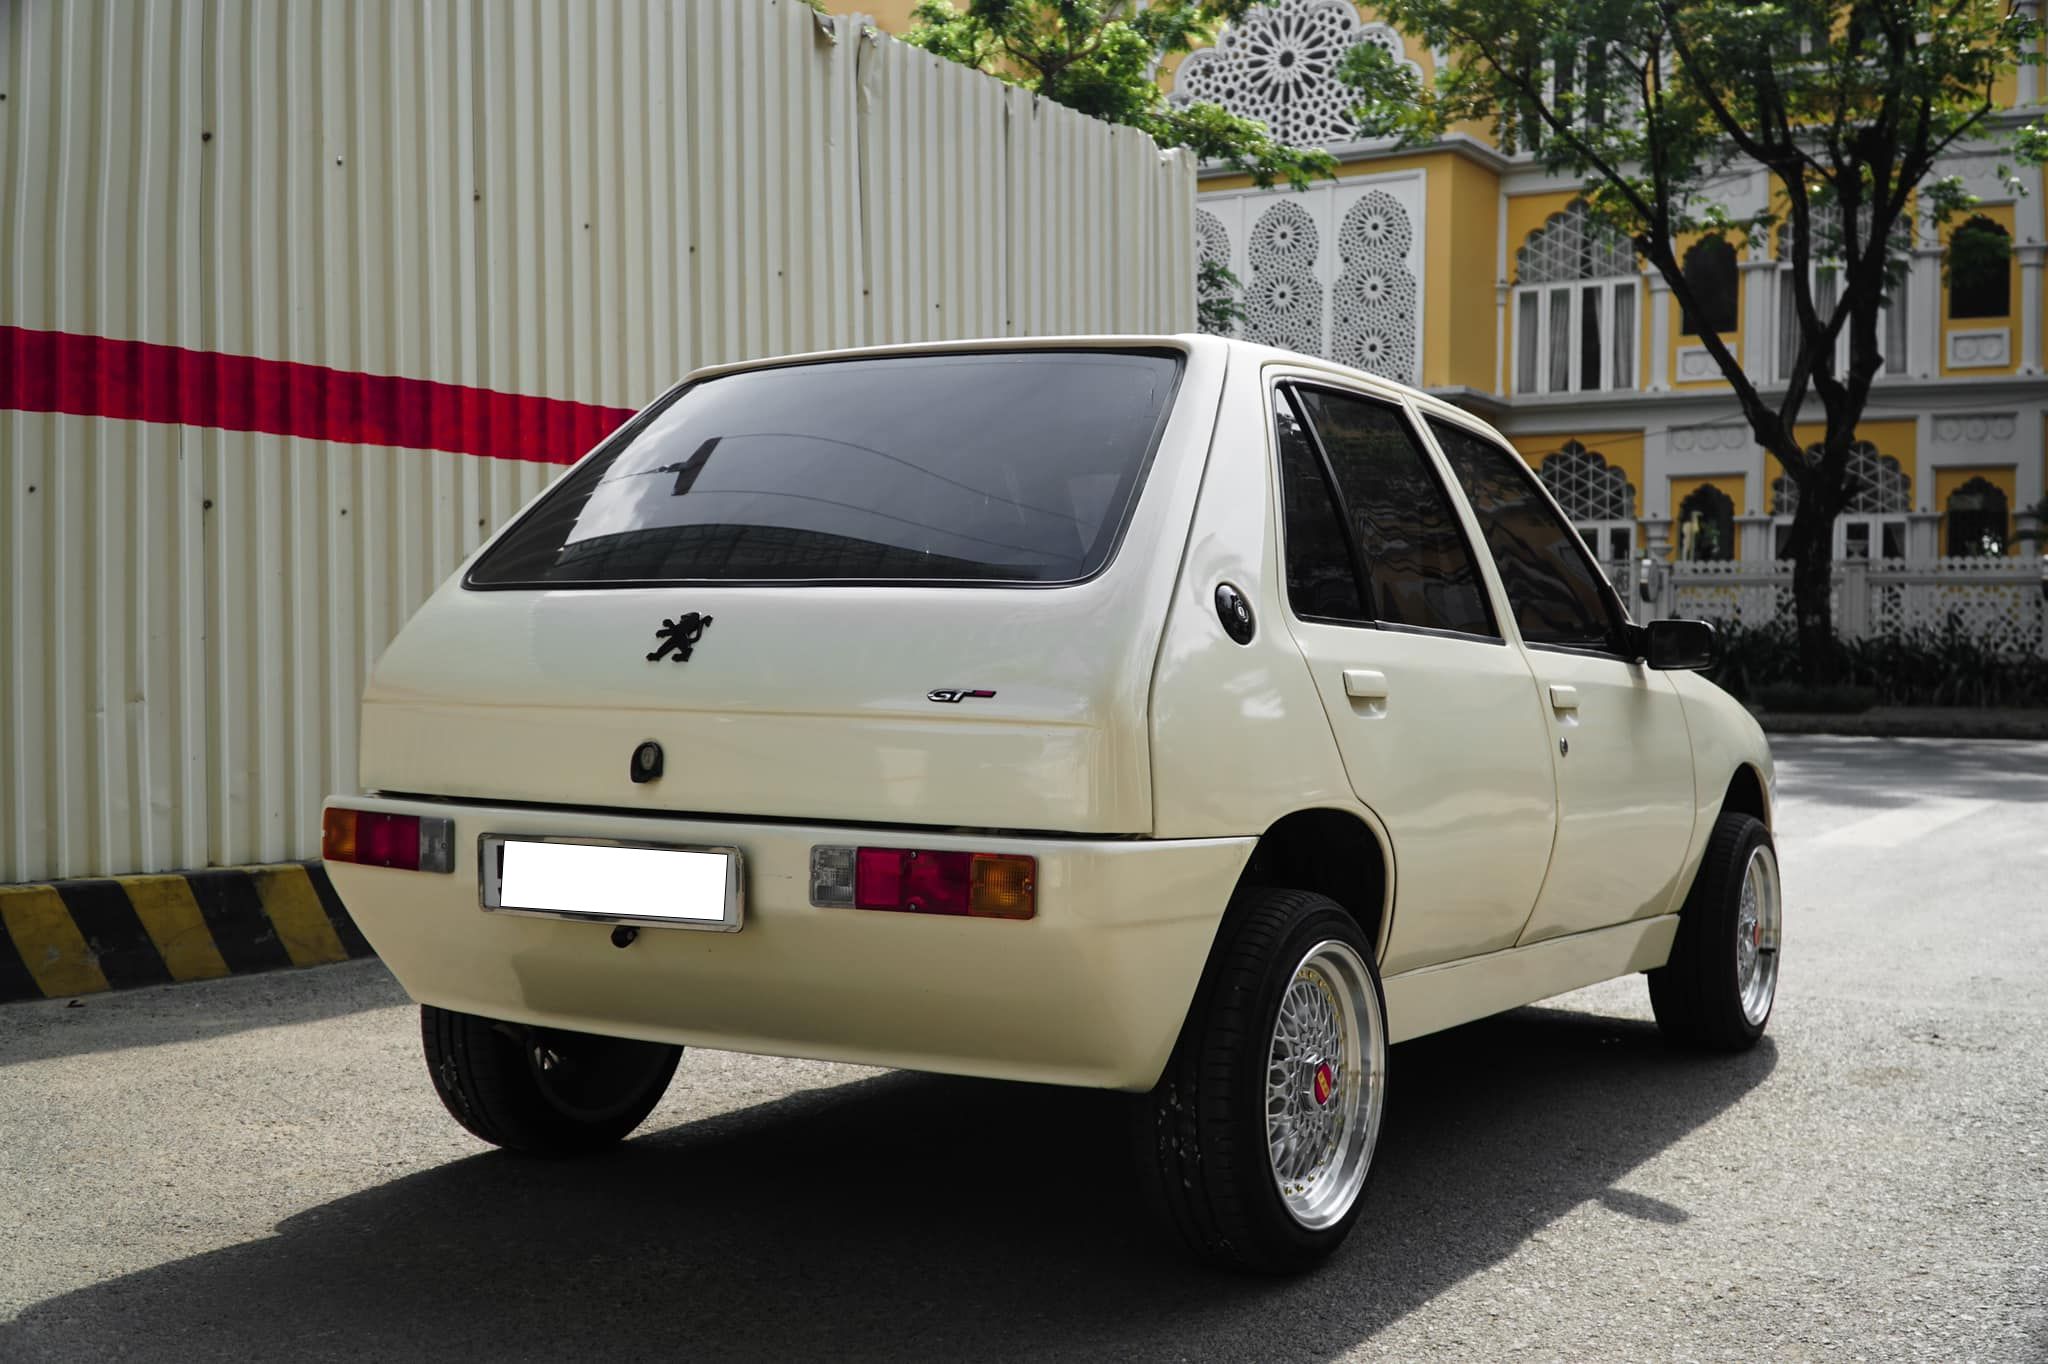 Used car buying guide Peugeot 205 GTi  Autocar